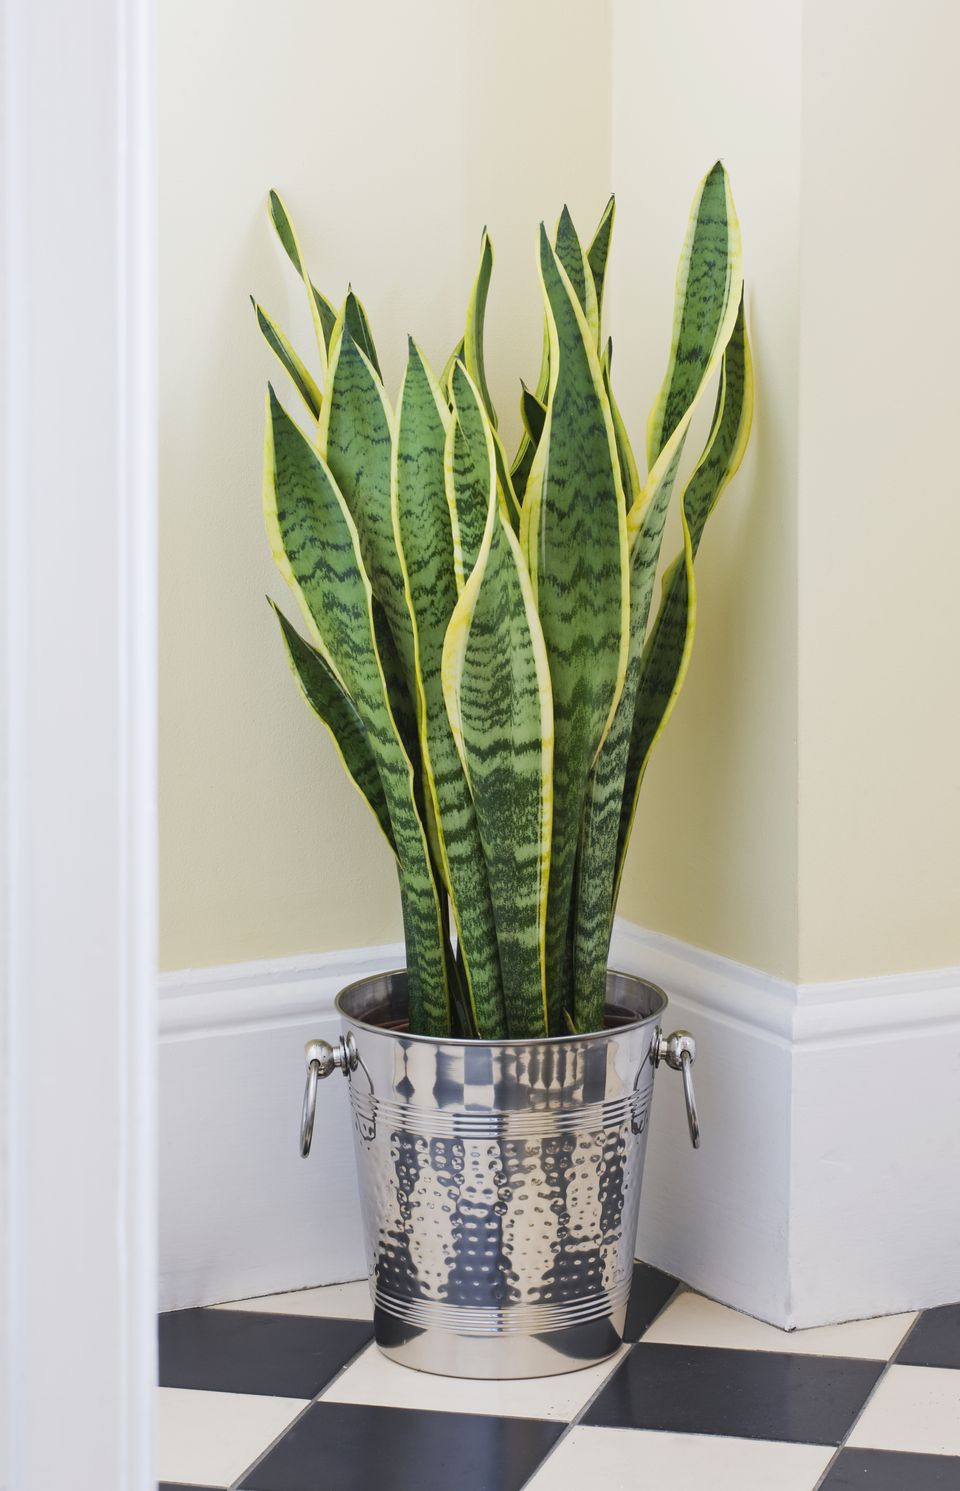 7 Houseplants for Low Light Conditions